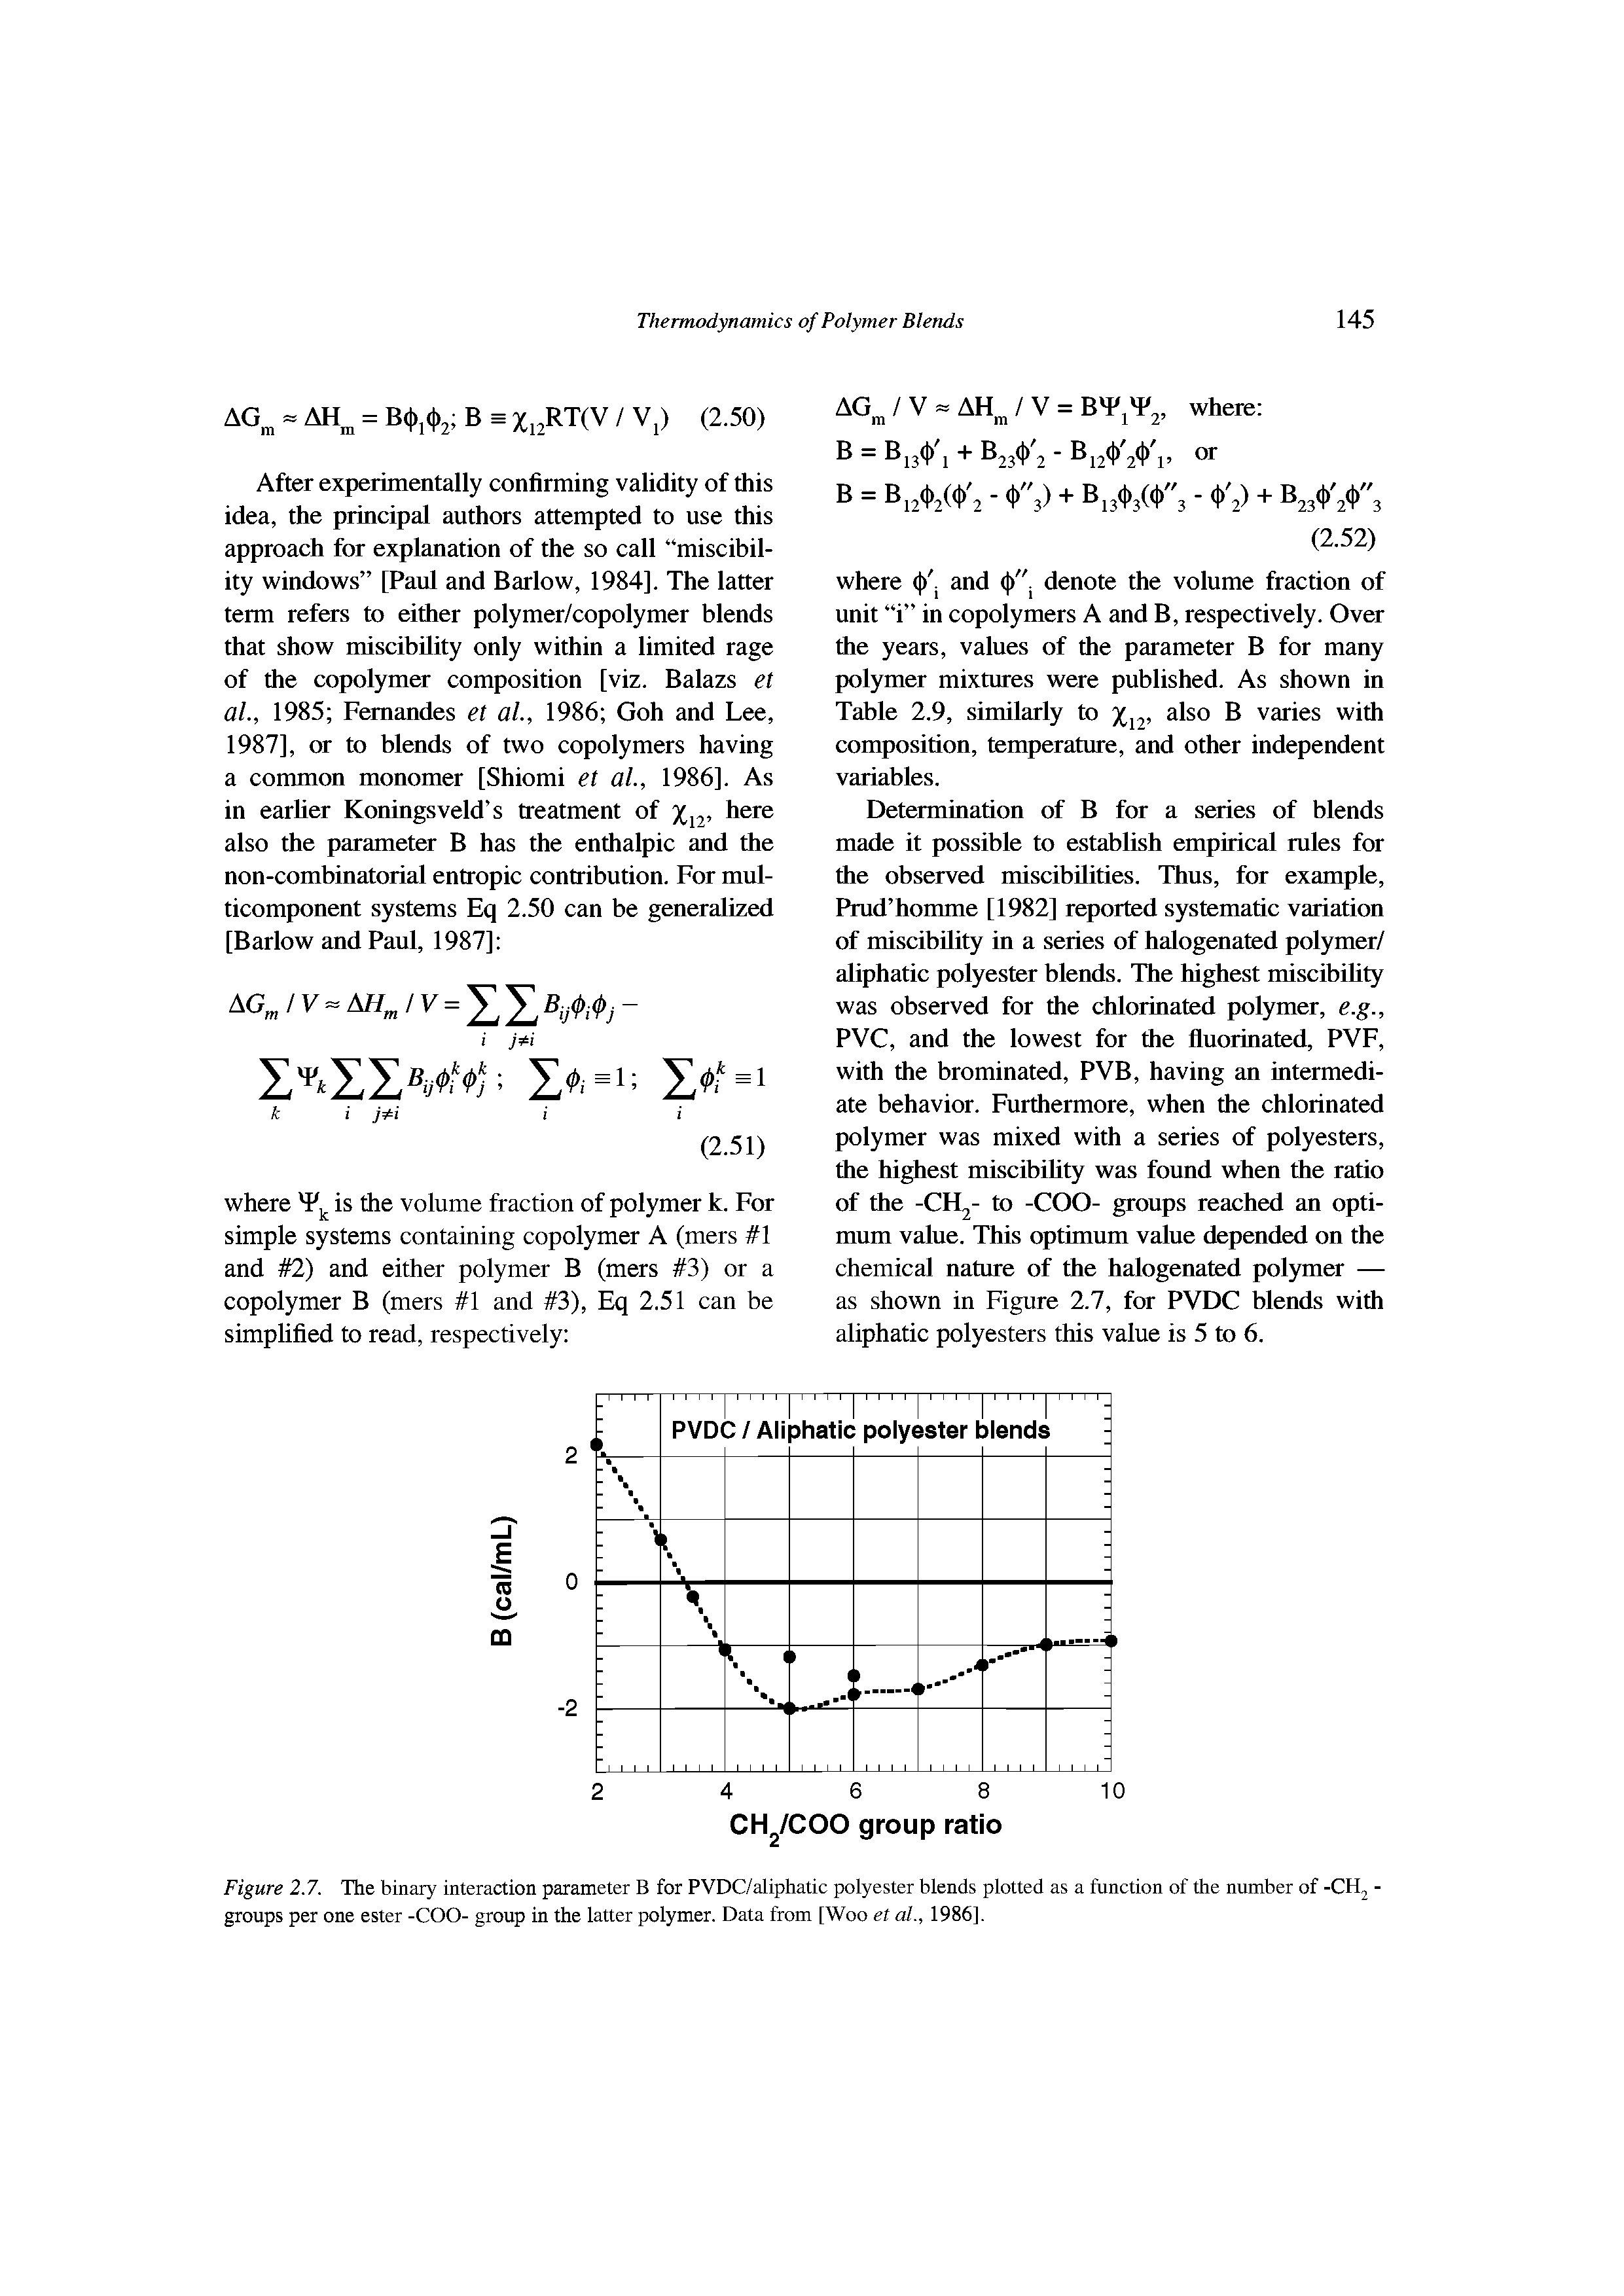 Figure 2.7. The binary interaction parameter B for PVDC/aliphatic polyester blends plotted as a function of the number of -CHj -groups per one ester -COO- group in the latter polymer. Data from [Woo et al., 1986],...